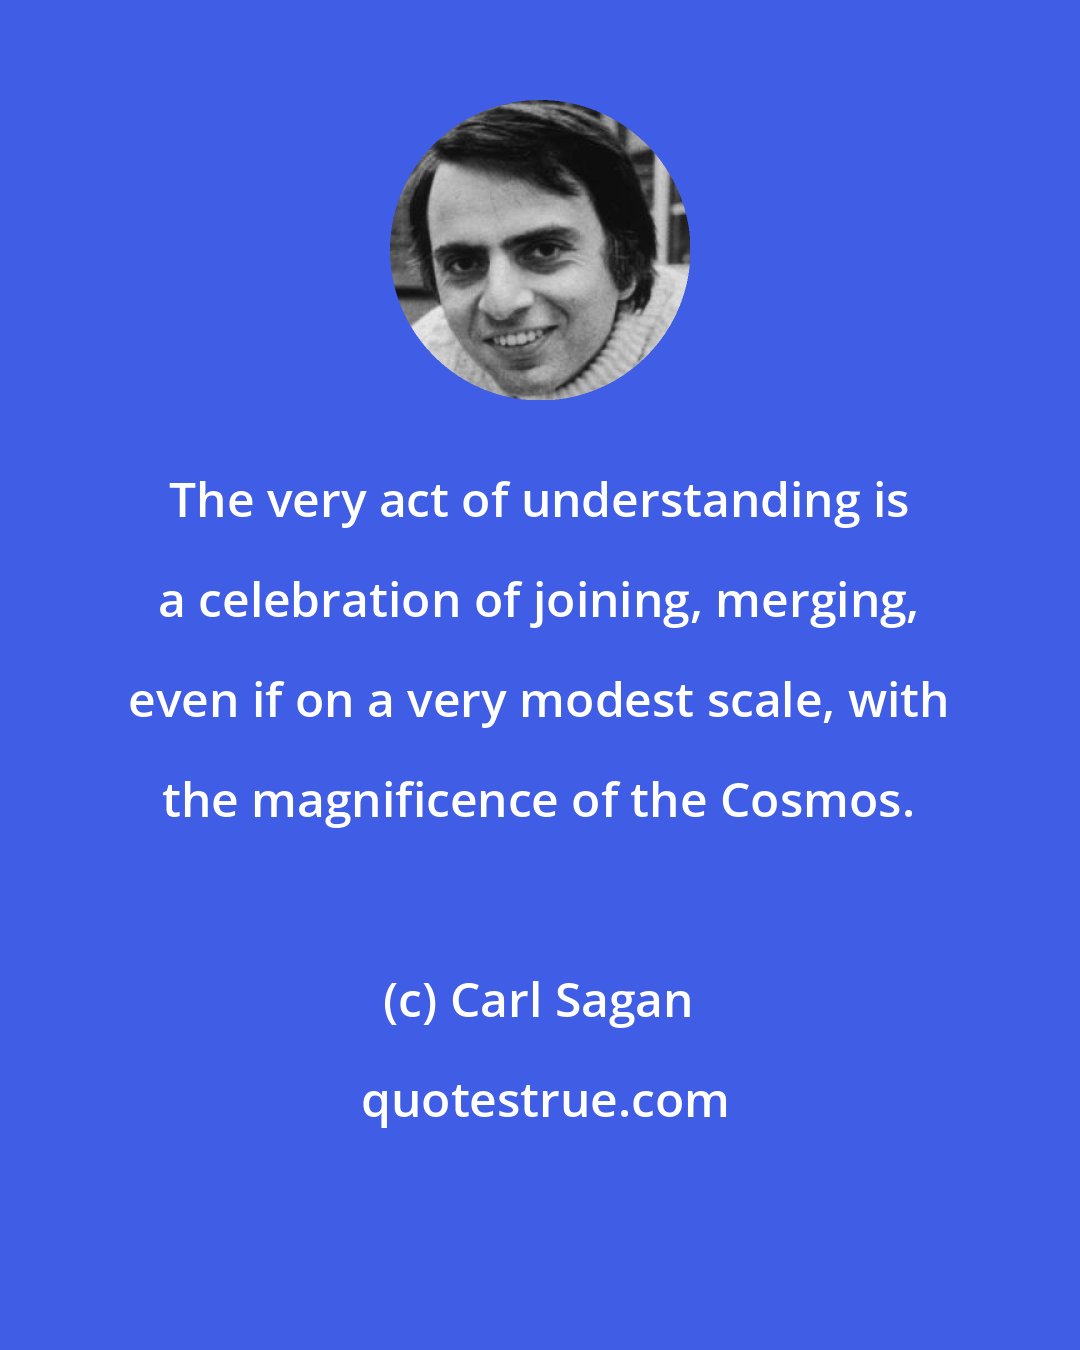 Carl Sagan: The very act of understanding is a celebration of joining, merging, even if on a very modest scale, with the magnificence of the Cosmos.